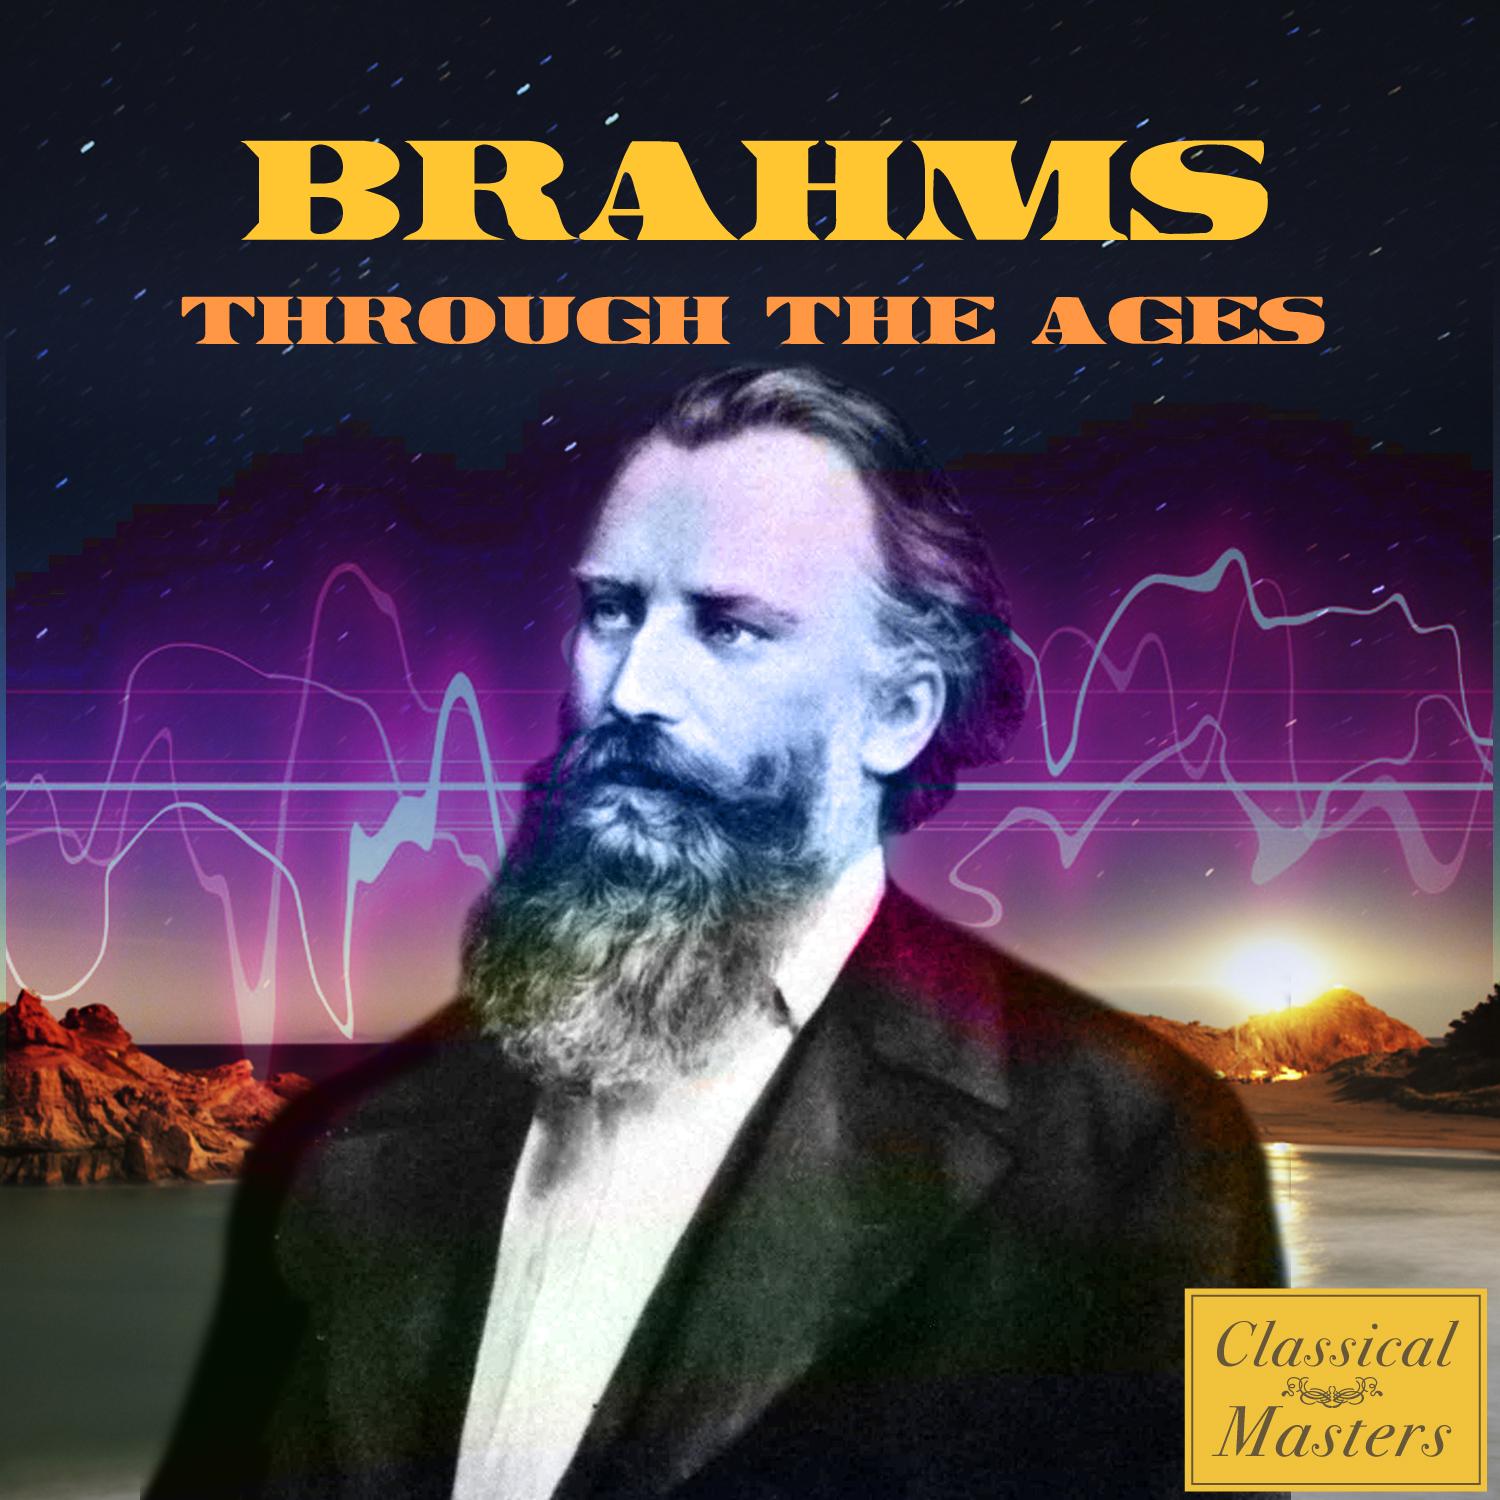 Brahms Through the Ages